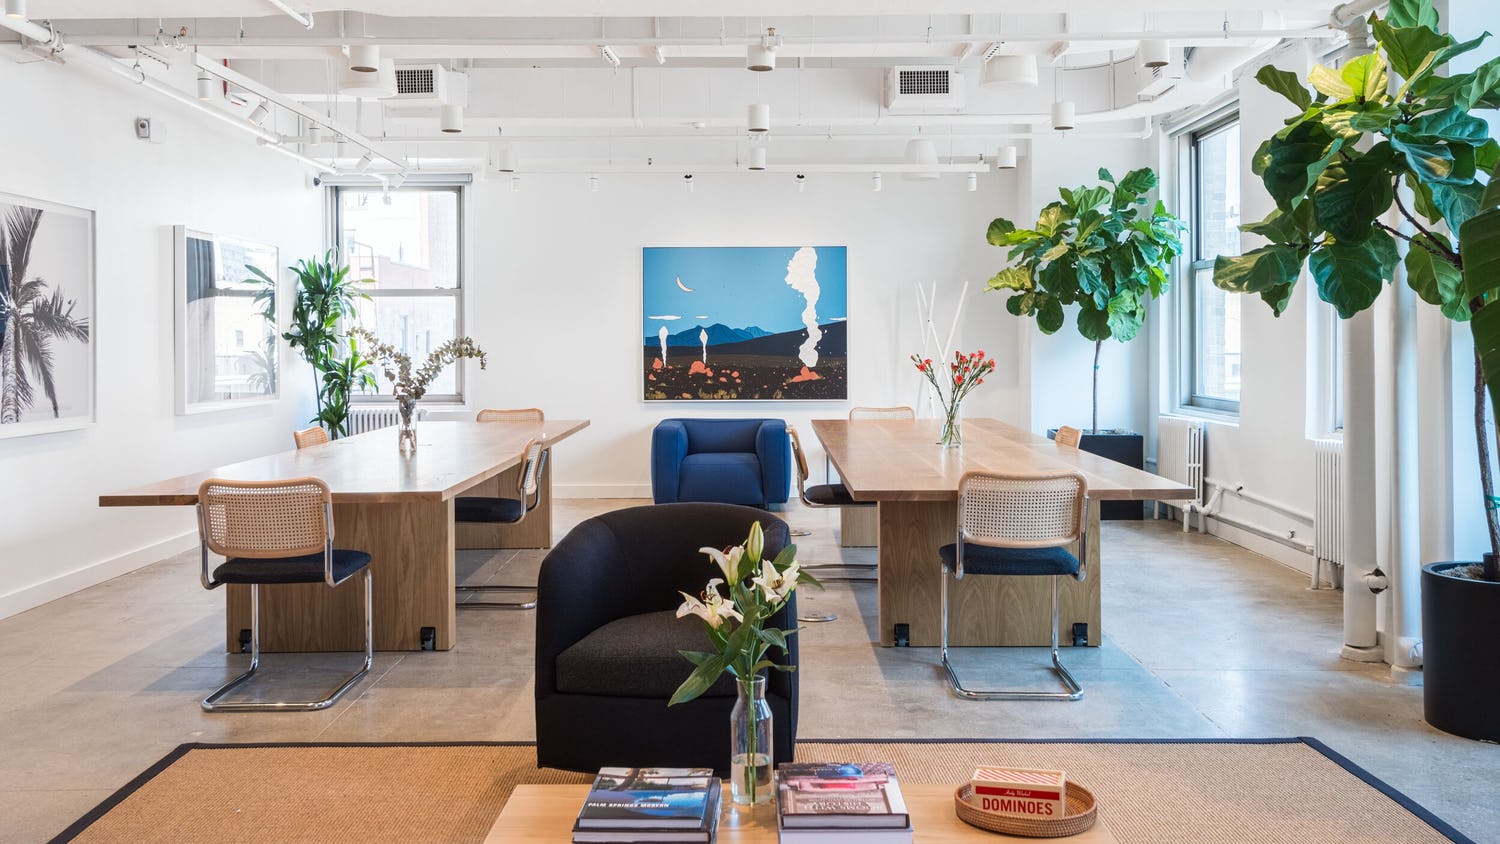 Lefcourt Madison, 16 East 34th Street, Coworking Space NYC